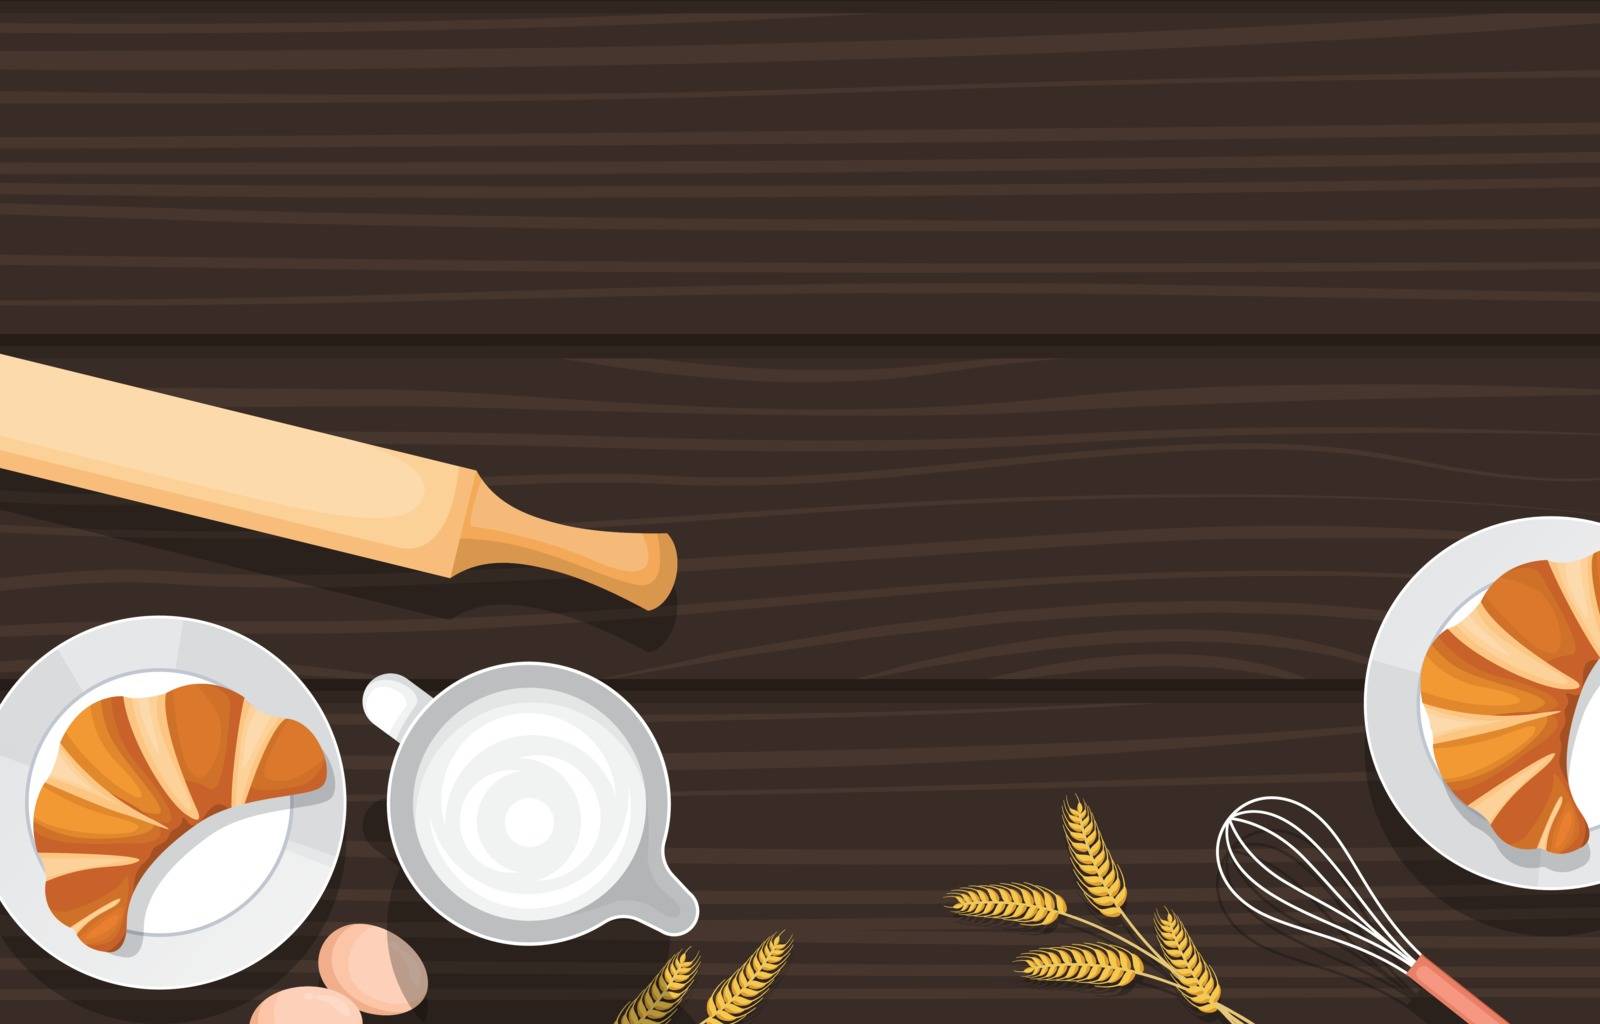 Bread Food Utensil on Cooking Wooden Table Kitchen Backdrop Illustration